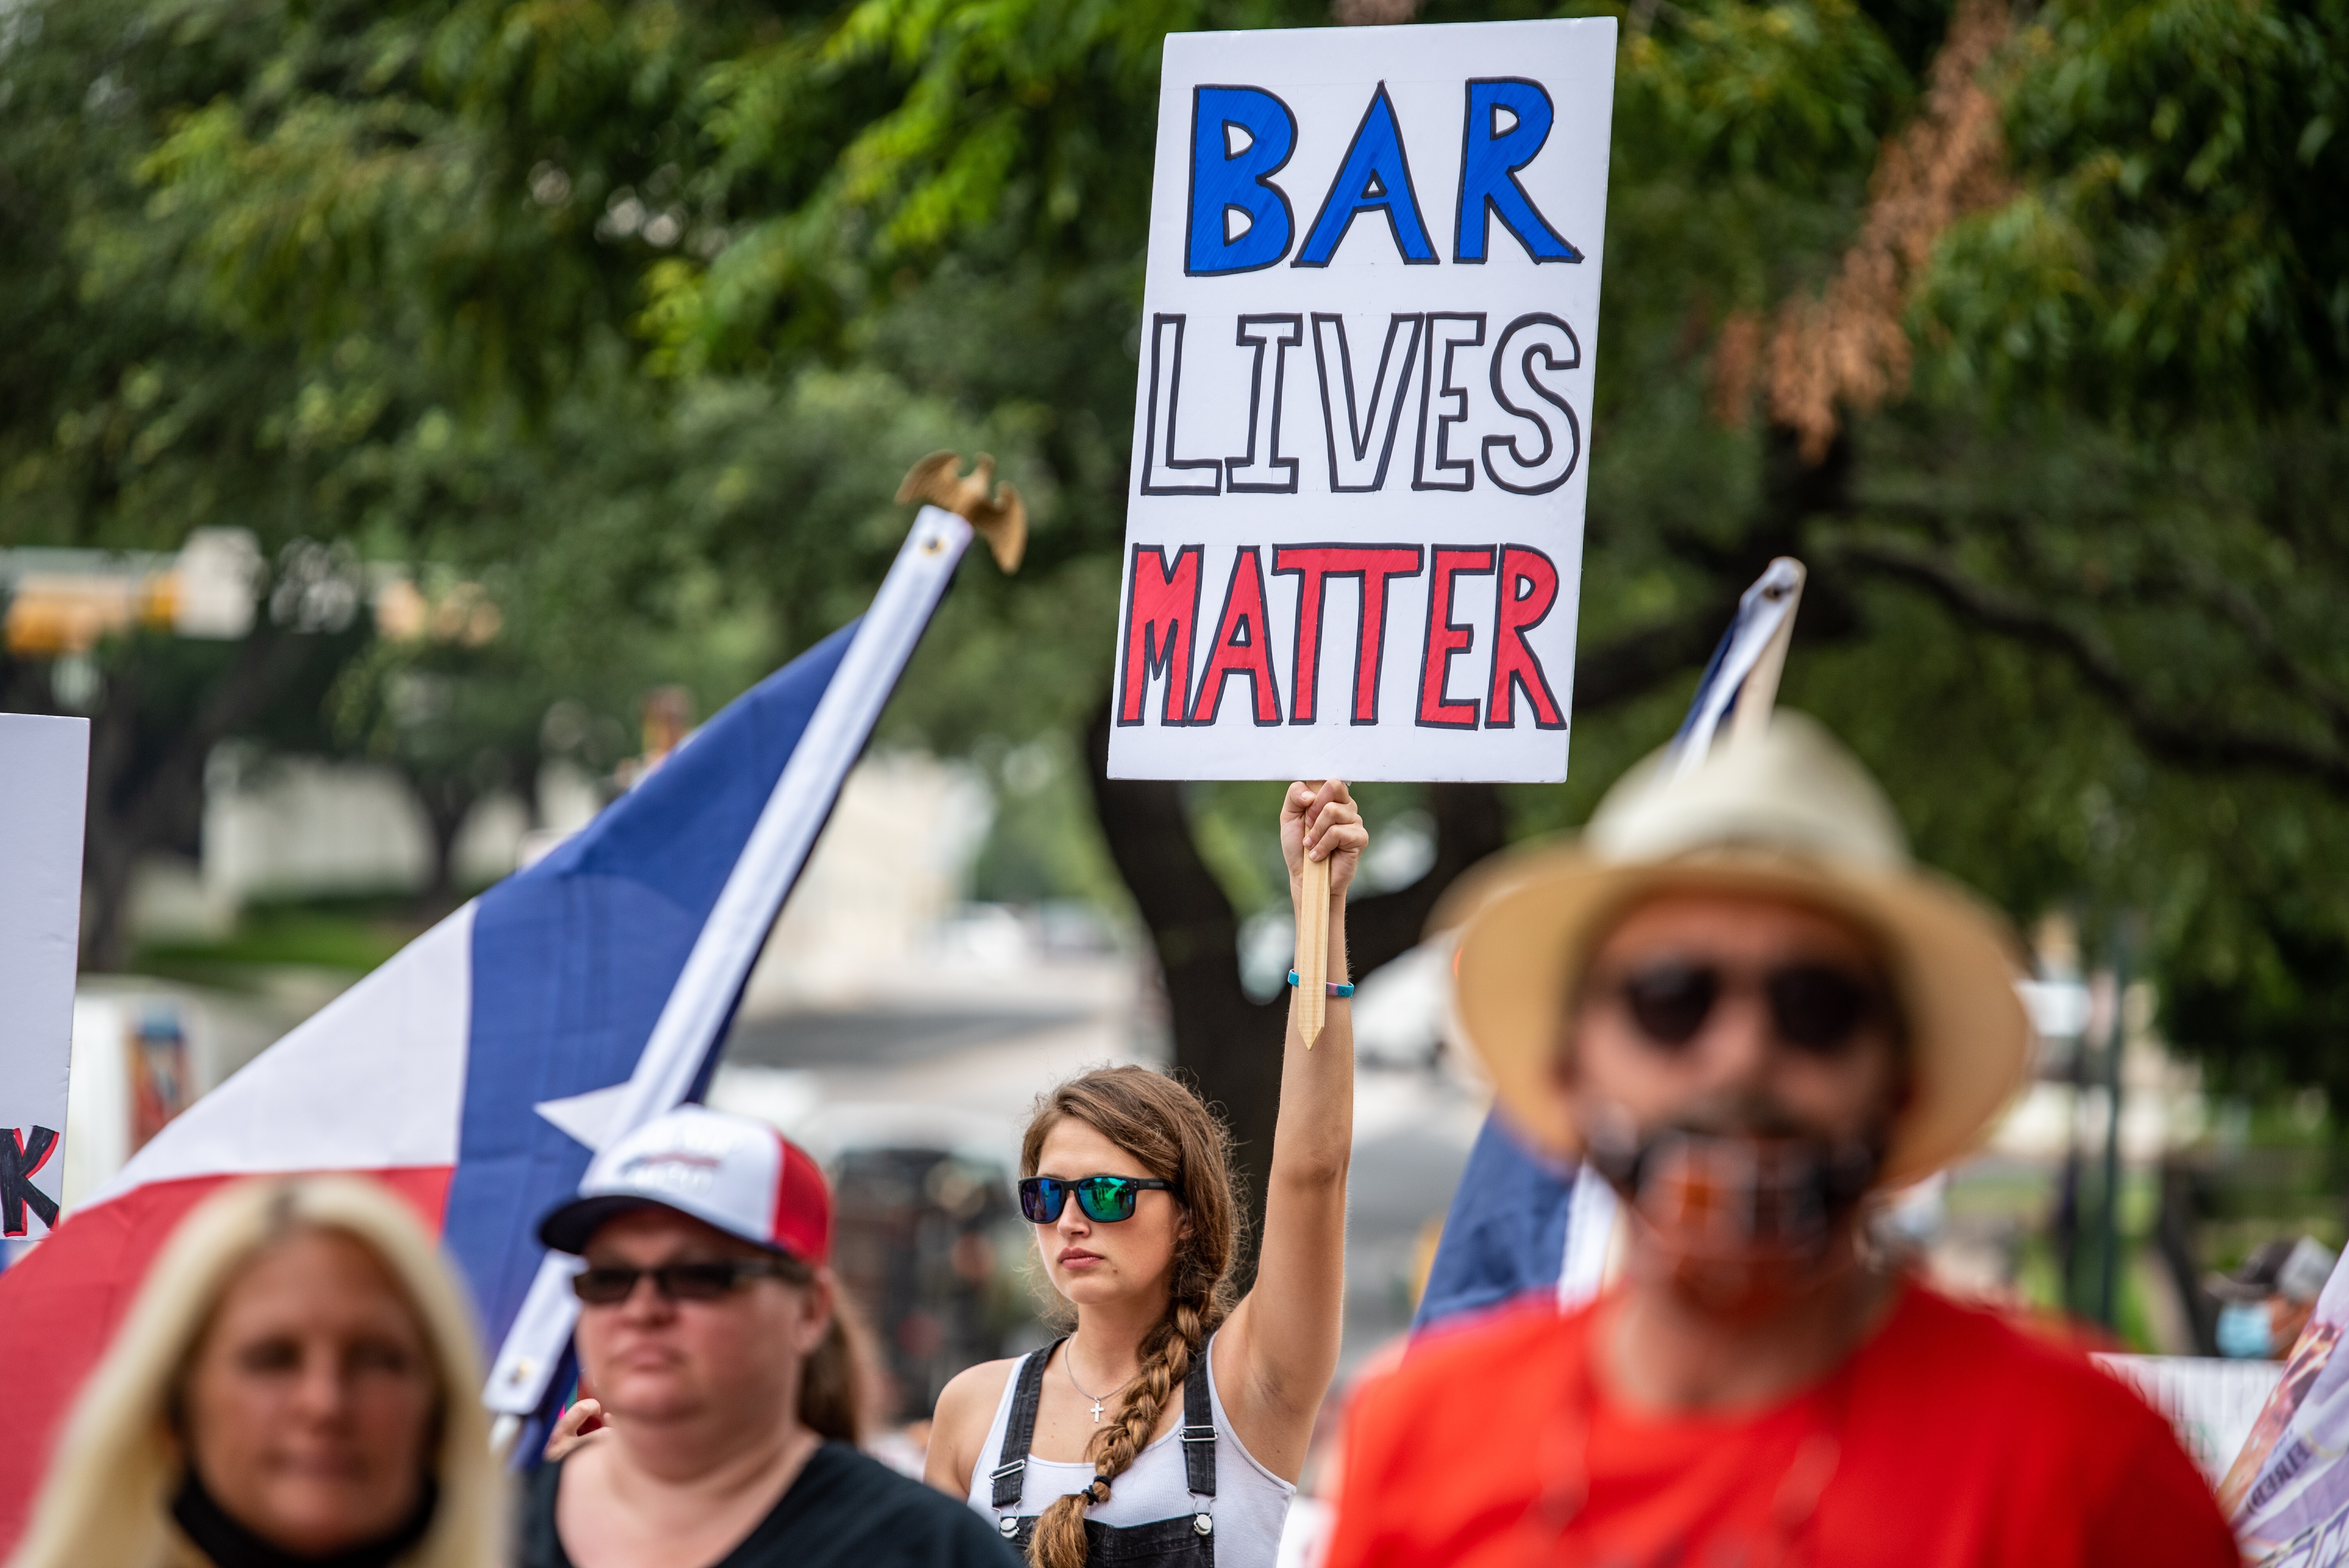 A demonstrator holds up a sign during a “Bar Lives Matter” protest in Austin, Texas. Photo: Bloomberg